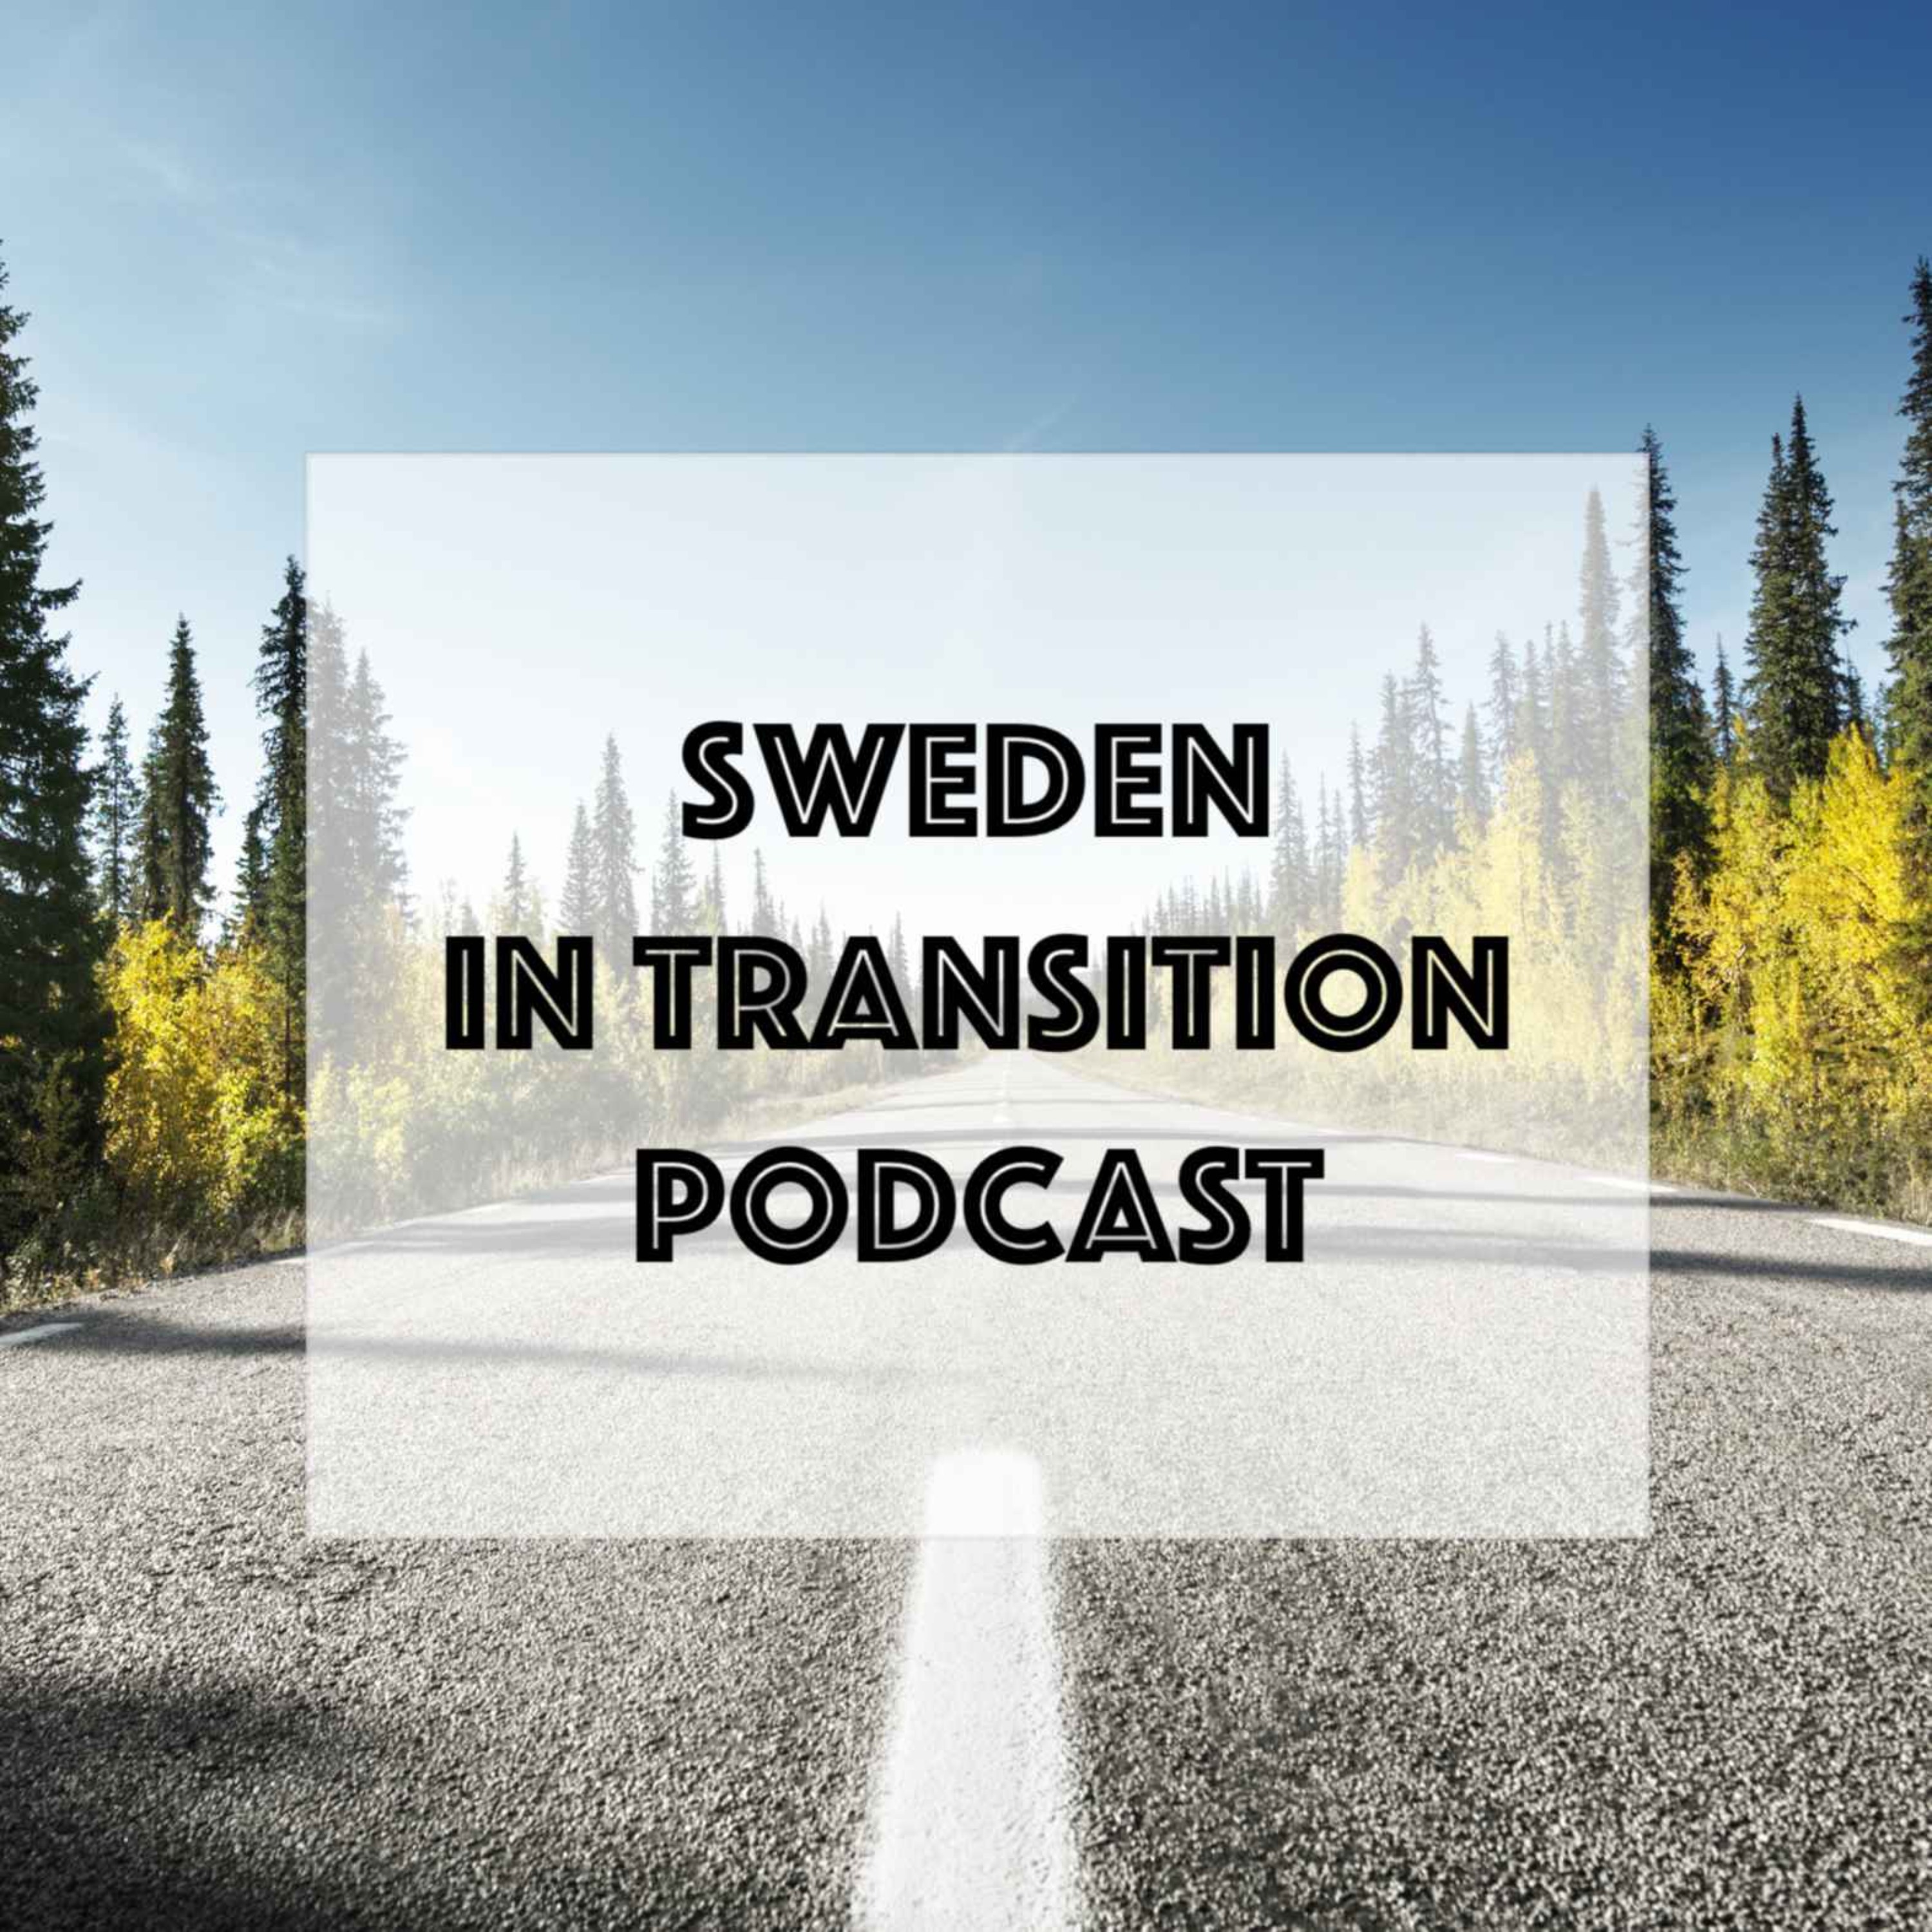 Sweden in Transition #18 - Pella Thiel on Ecocide